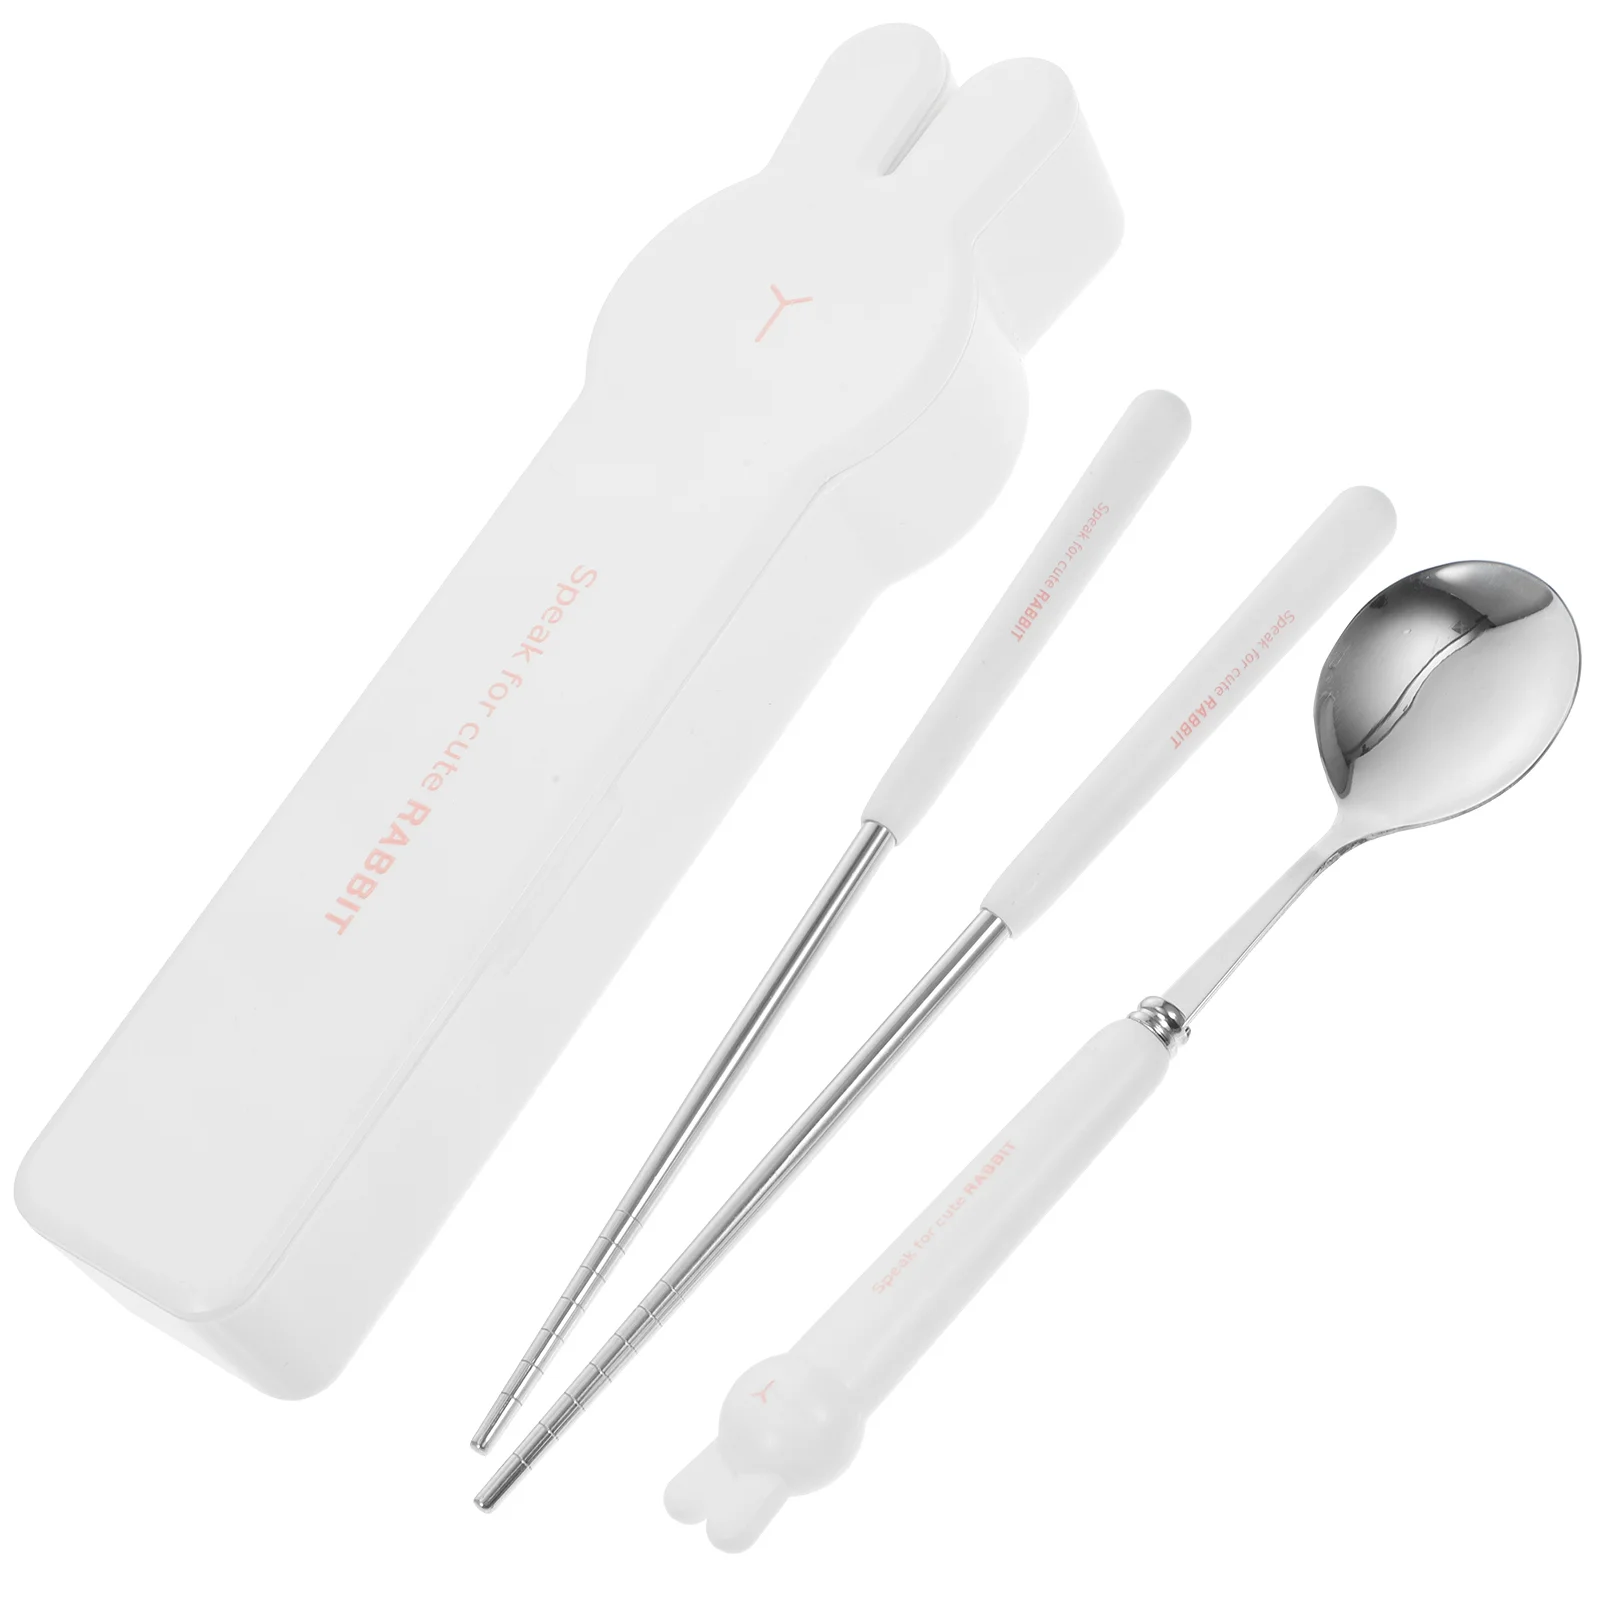 

Chopsticks Case Silverware Spoons Only Chinese Gift Box Lunch Reusable Pp Plastic Utensils Portable Cutlery Travel